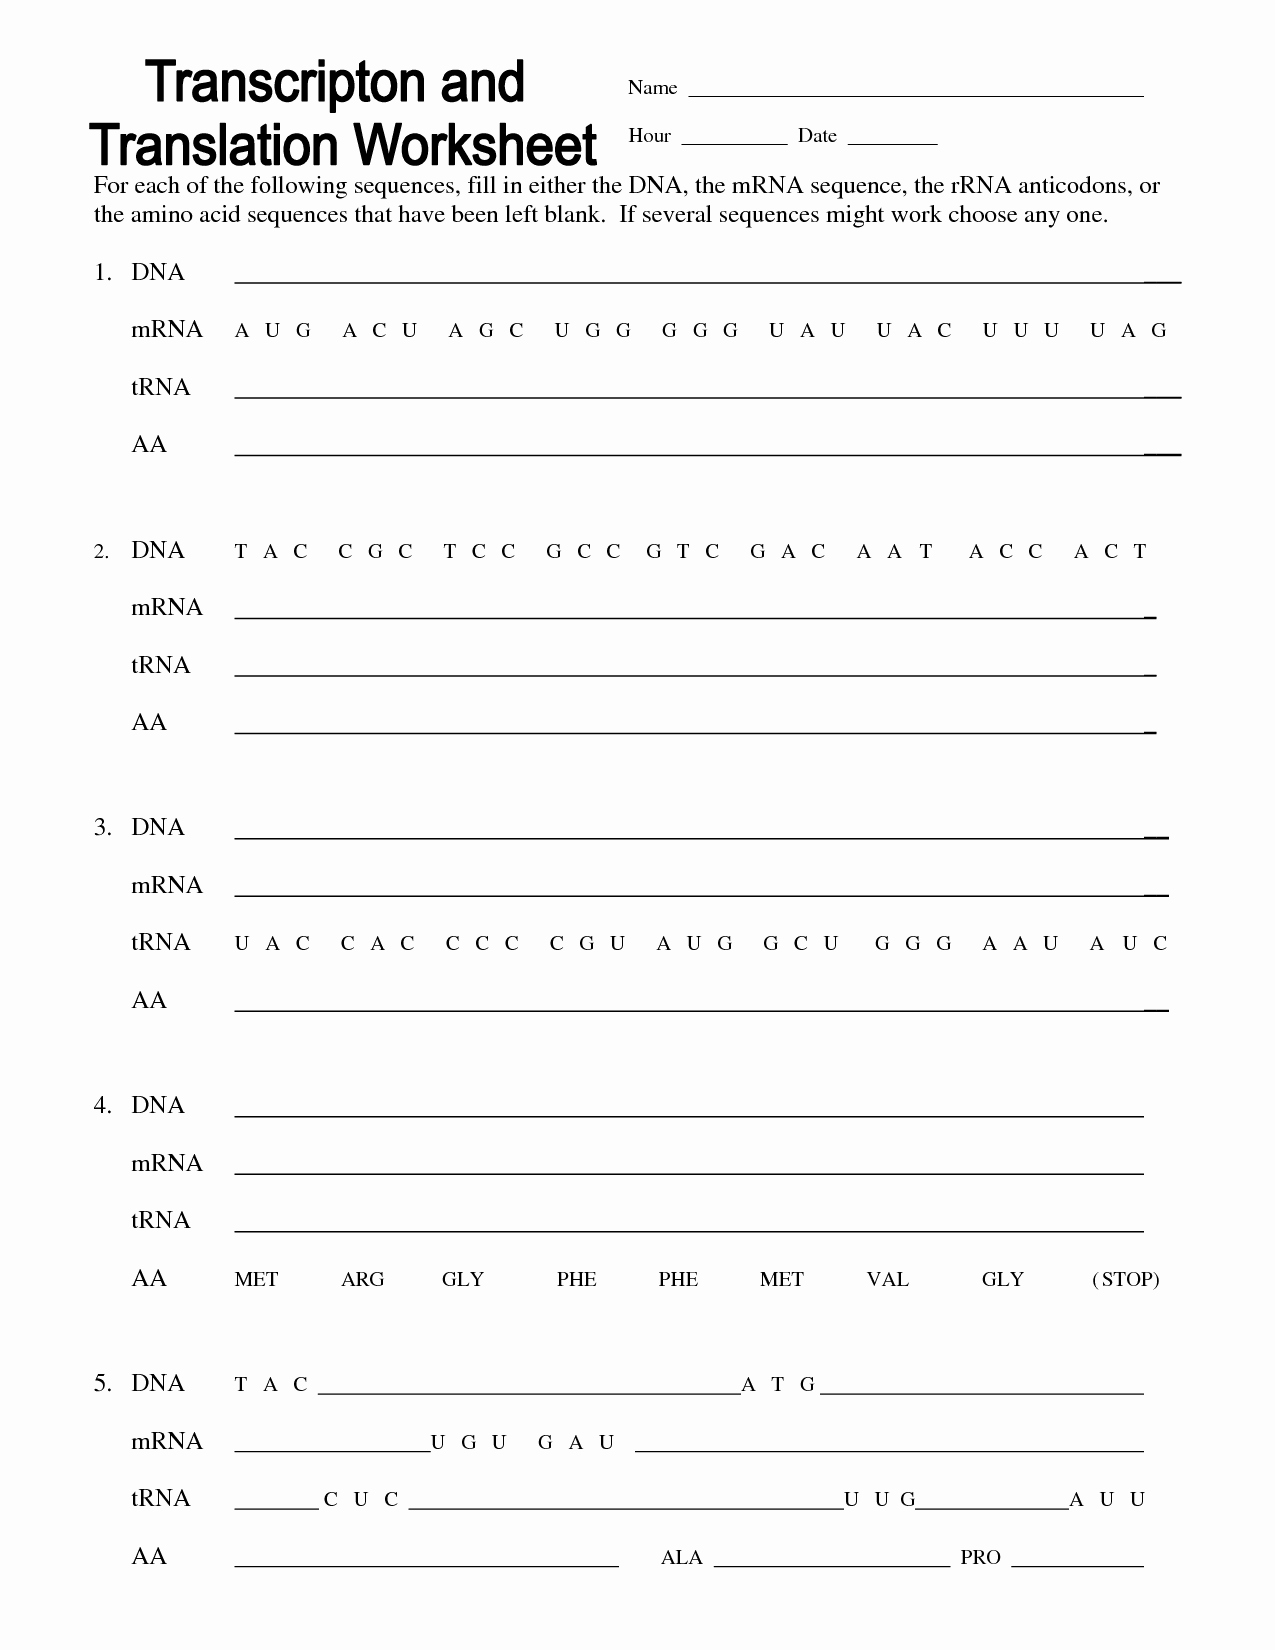 Nucleic Acid Worksheet Answers Awesome Nucleic Acids Dna the Double Helix Worksheet Answers